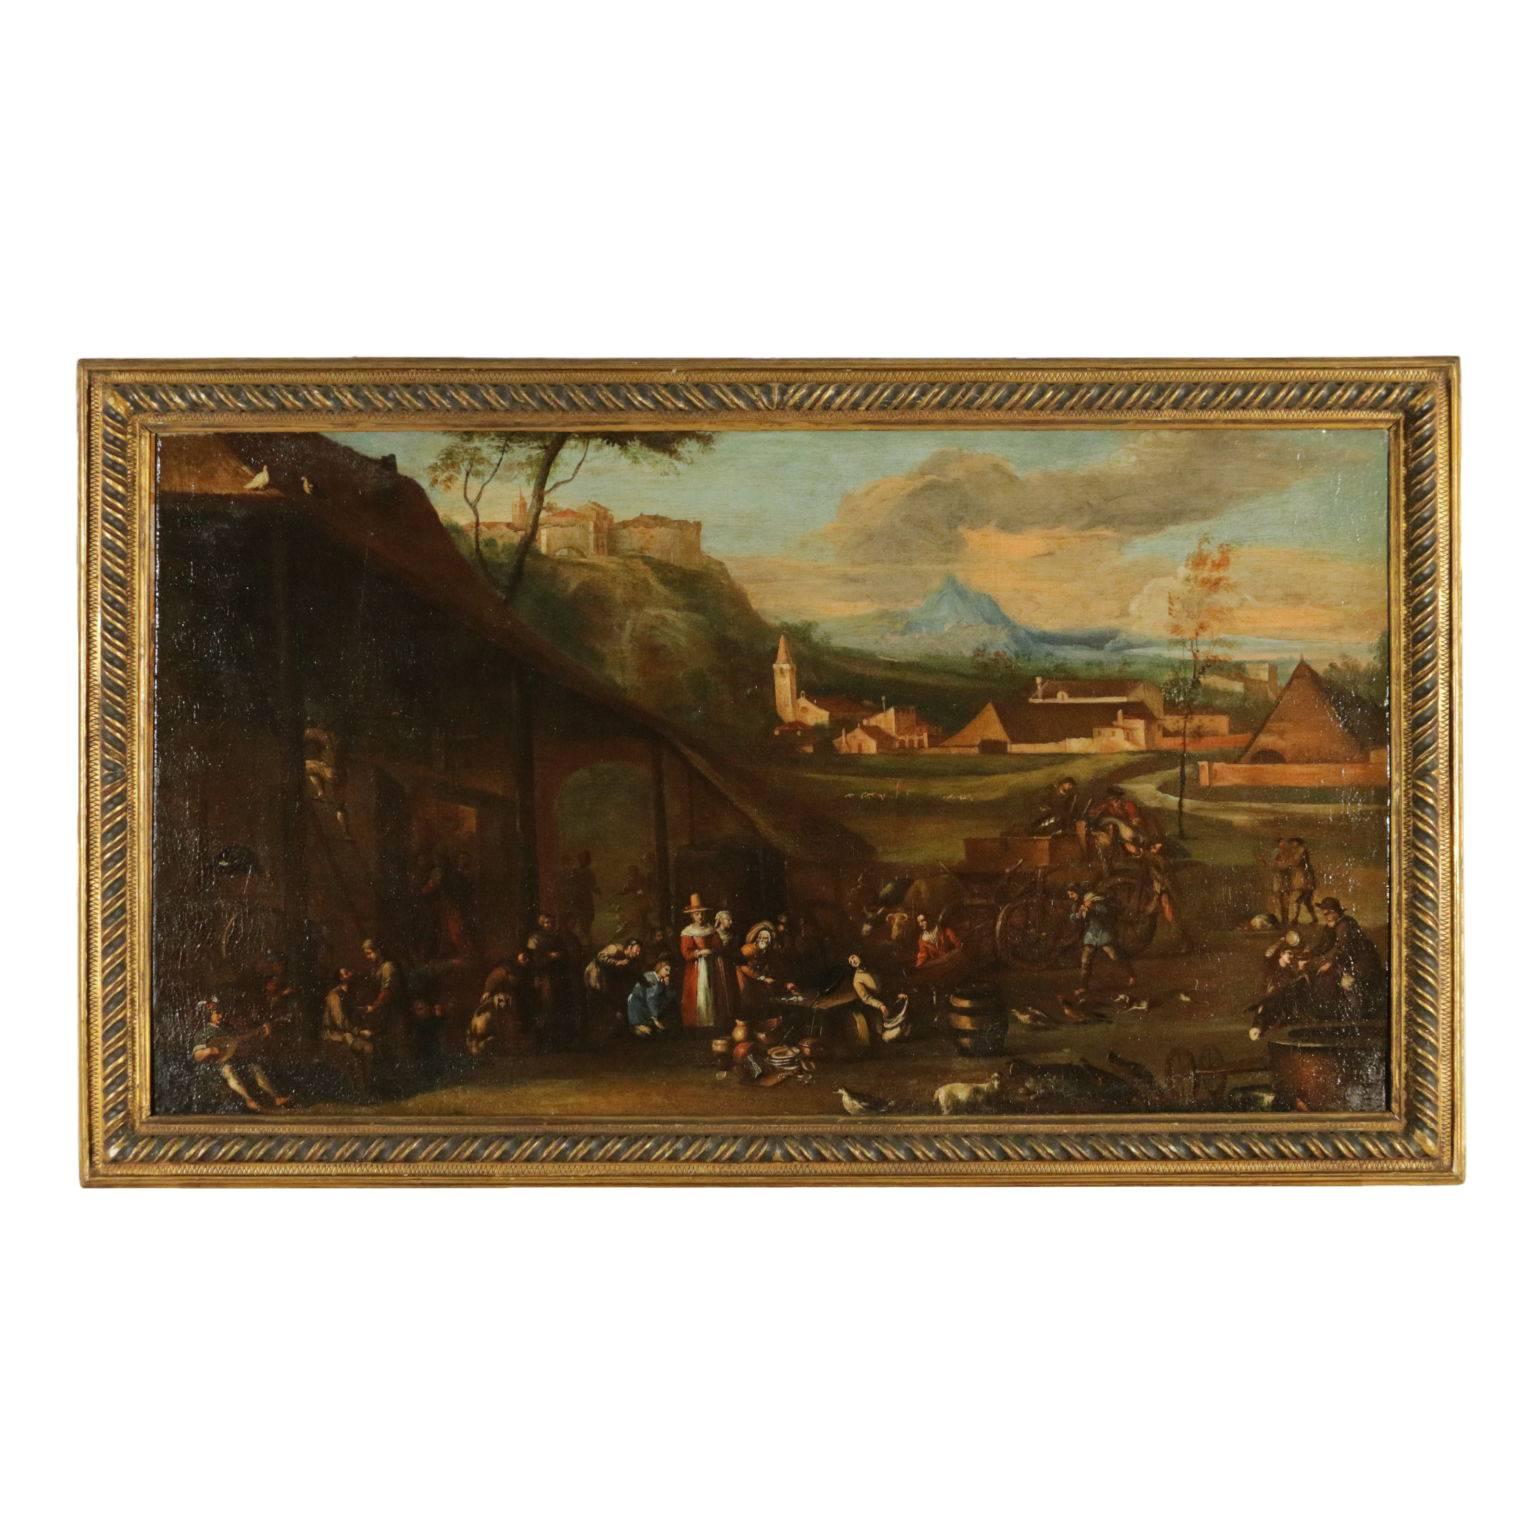 Unknown Landscape Painting - Scenes of Farmer Lives Oil on Canvas 17th-18th Century